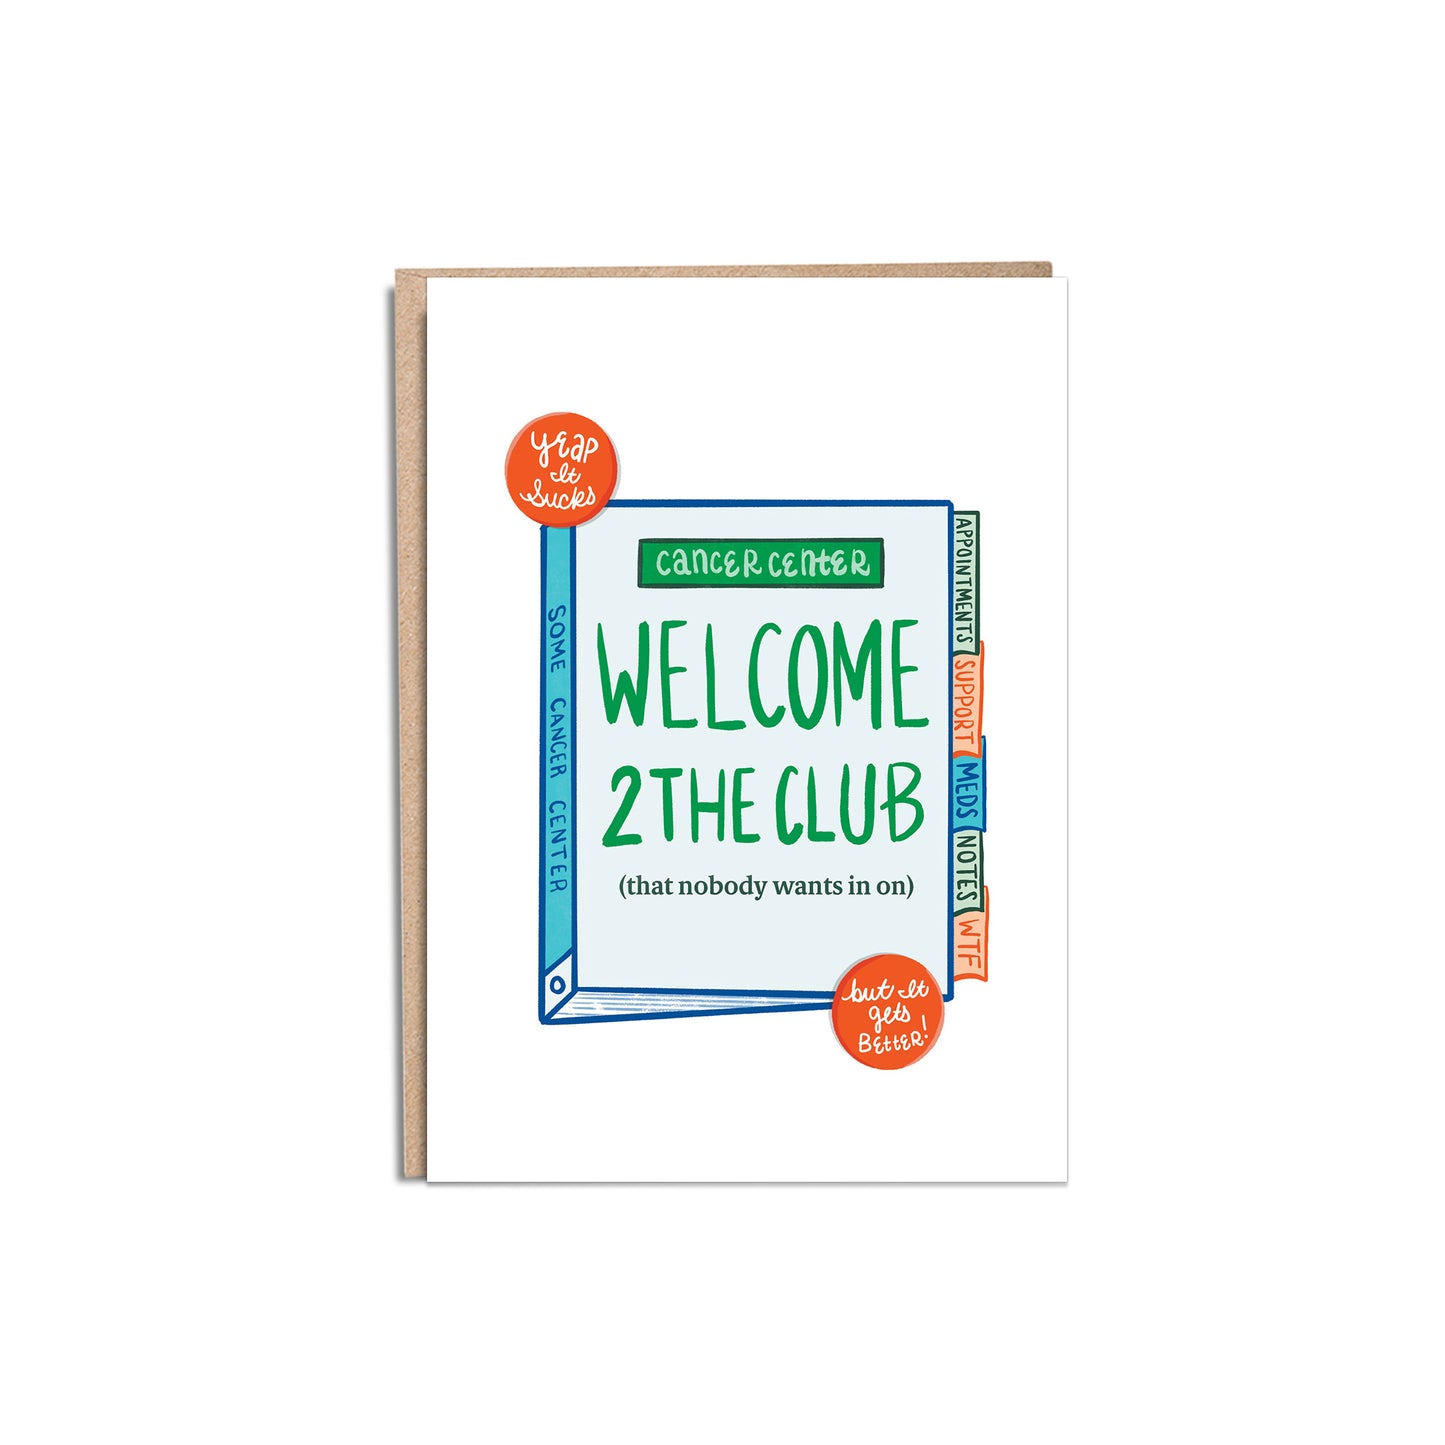 Welcome to the Cancer Club cancer 5x7” greeting card from Goods Made By Digitrillnana, Ashley Fletcher. Black Woman Owned. Perfect card for loved one with cancer, cancer diagnosis. Encouragement cards for cancer patients.